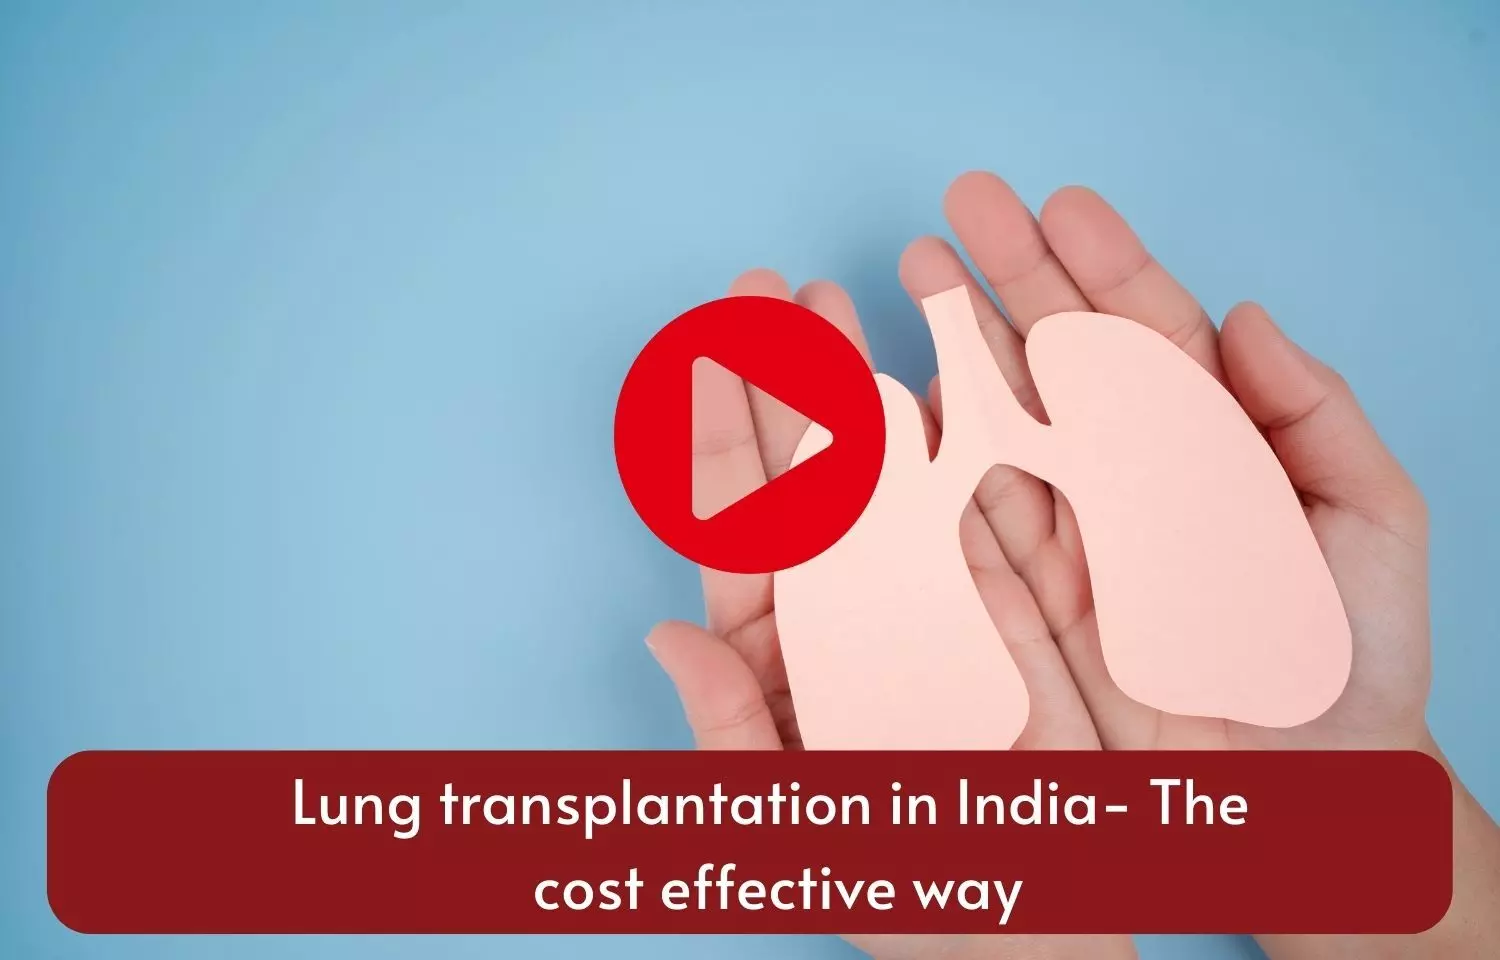 Lung transplantation in India- The cost effective way